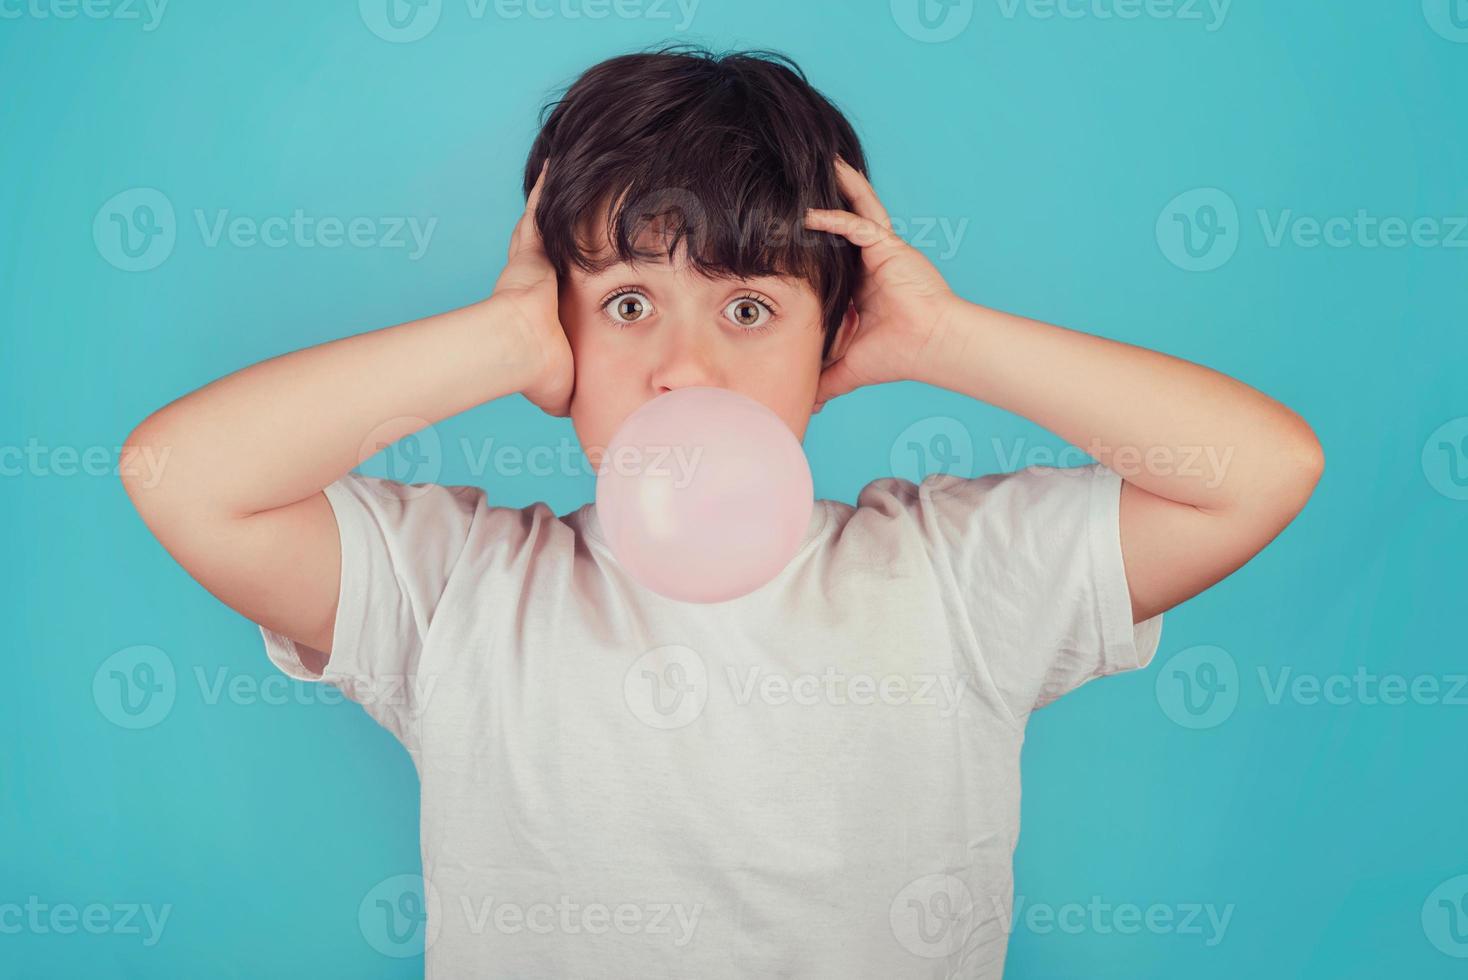 child with chewing gum in your mouth photo